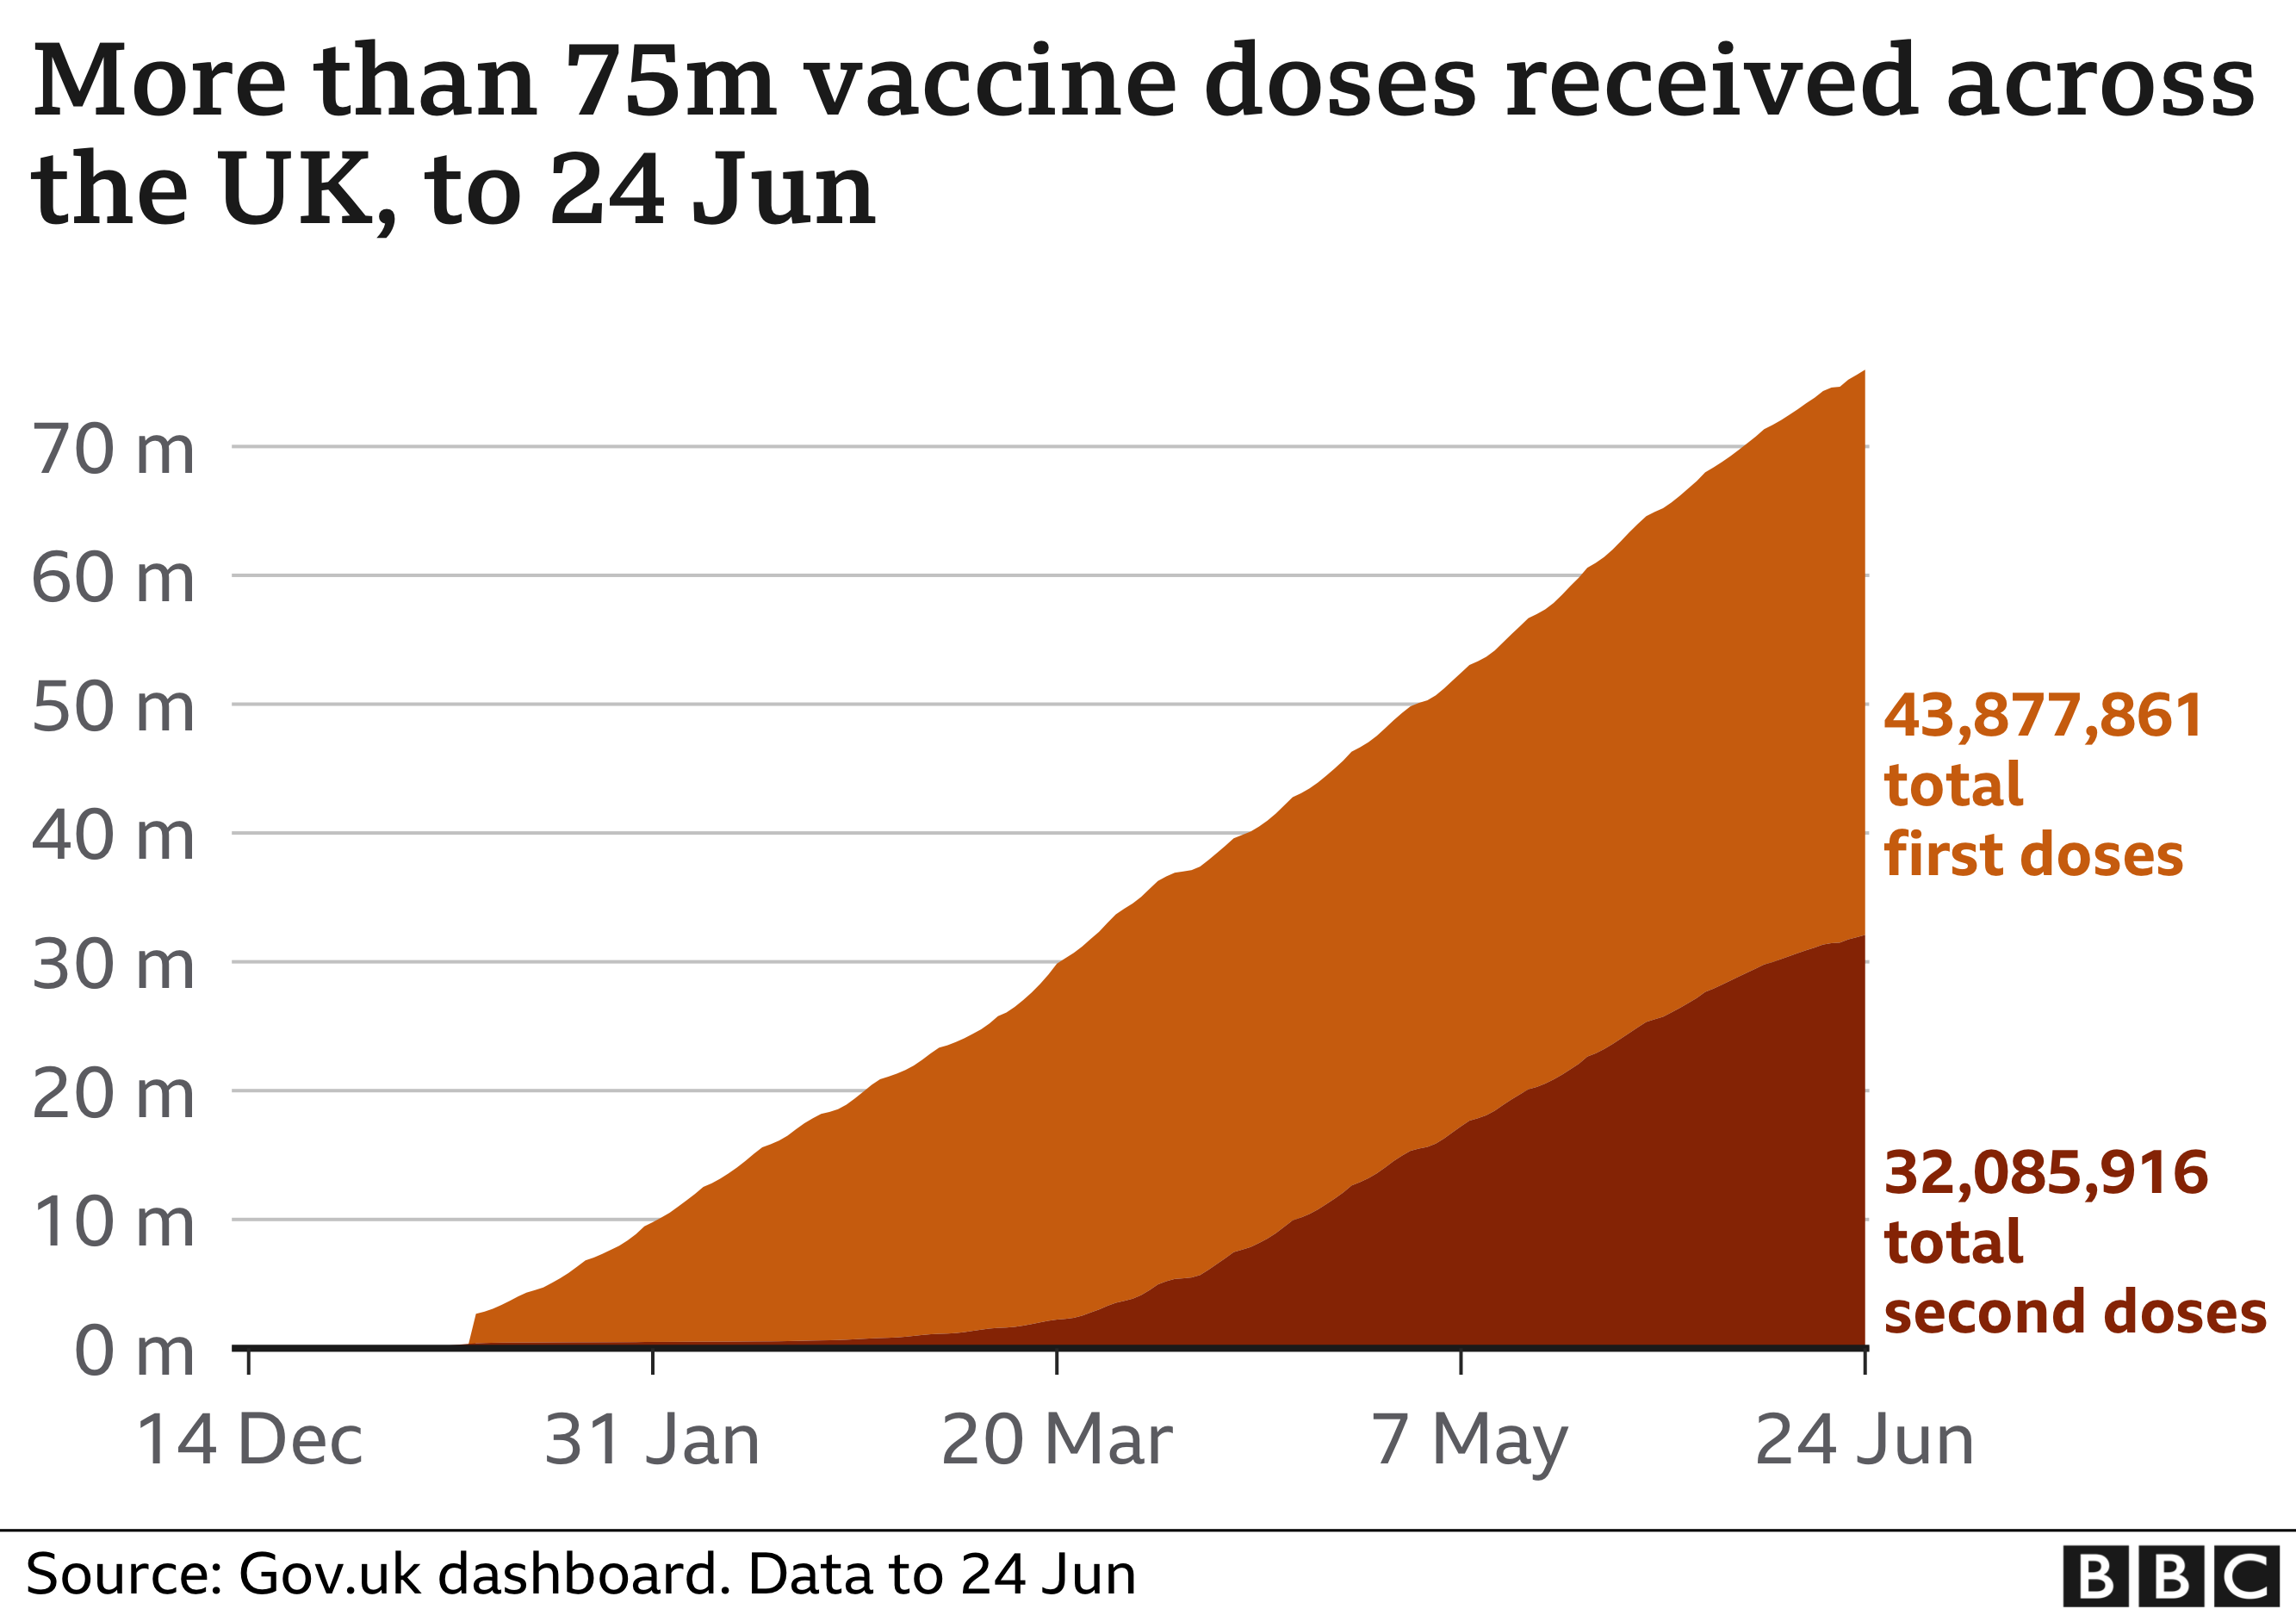 Chart showing that more than 75m vaccine doses have been administered across the UK